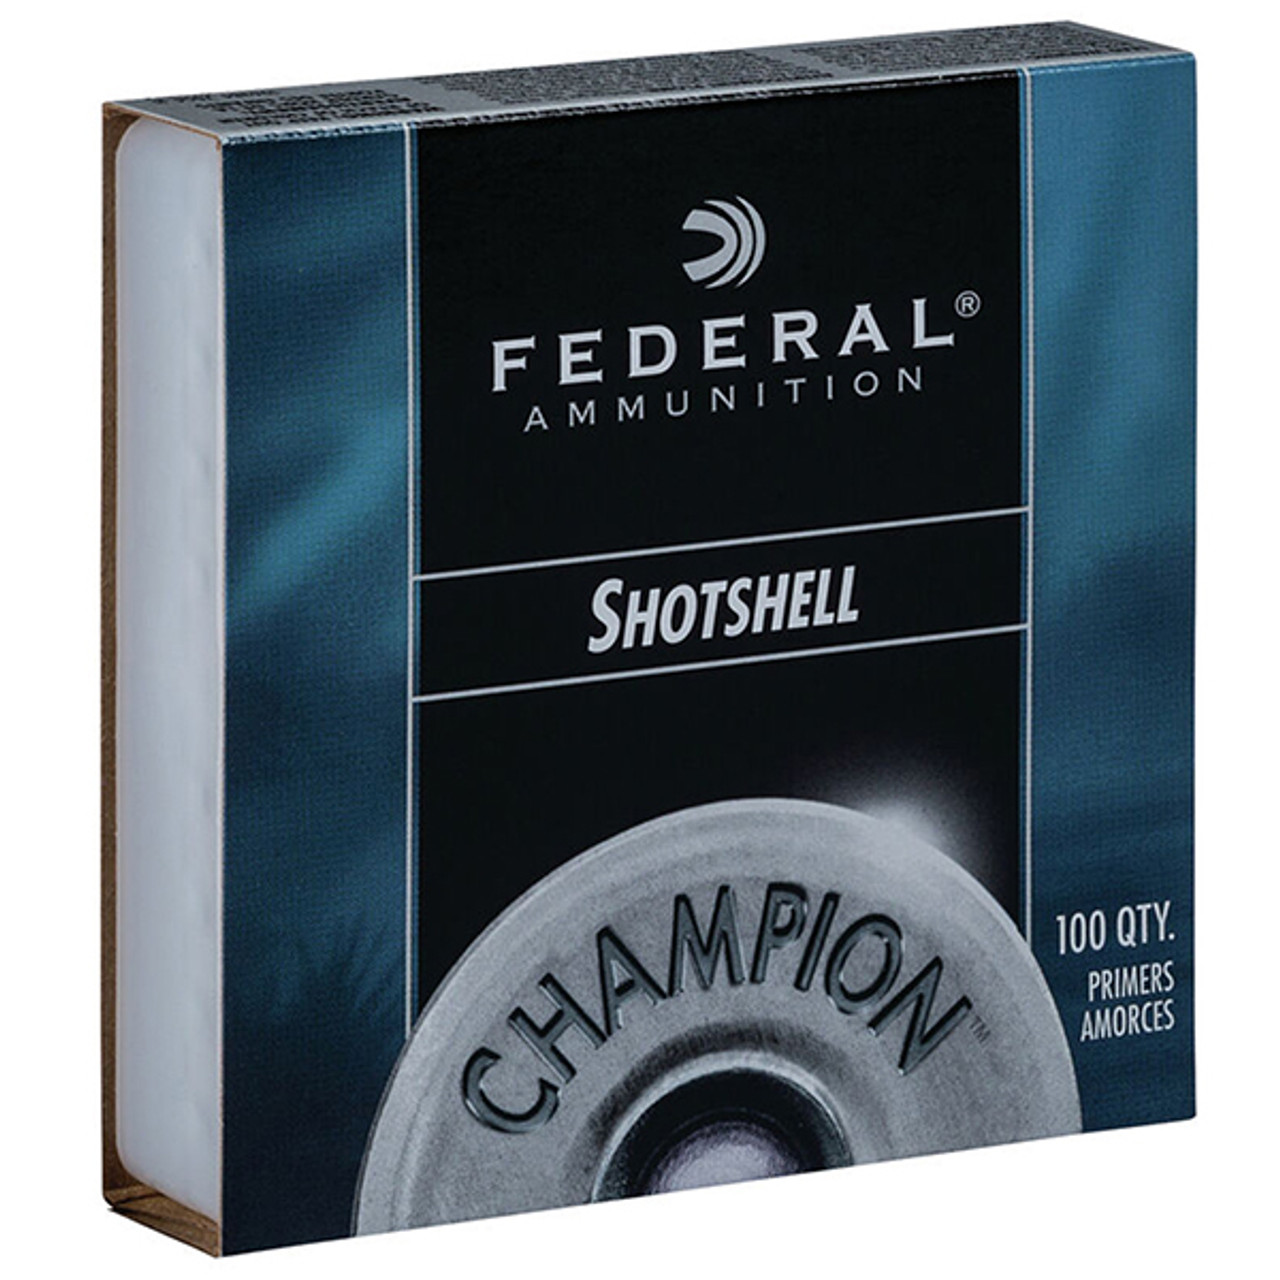 Federal Champion #209A Shotshell Primers - 100 Count - Rifle and pistol reloaders need the affordable and reliable performance of Federal Champion primers. Their unique priming mix and consistent ignition make them perfect for high-volume shooters, as well as those learning how to reload.

Unique Federal priming mix for consistent ignition
Affordably priced
Available in sizes to fit virtually all reloading needs